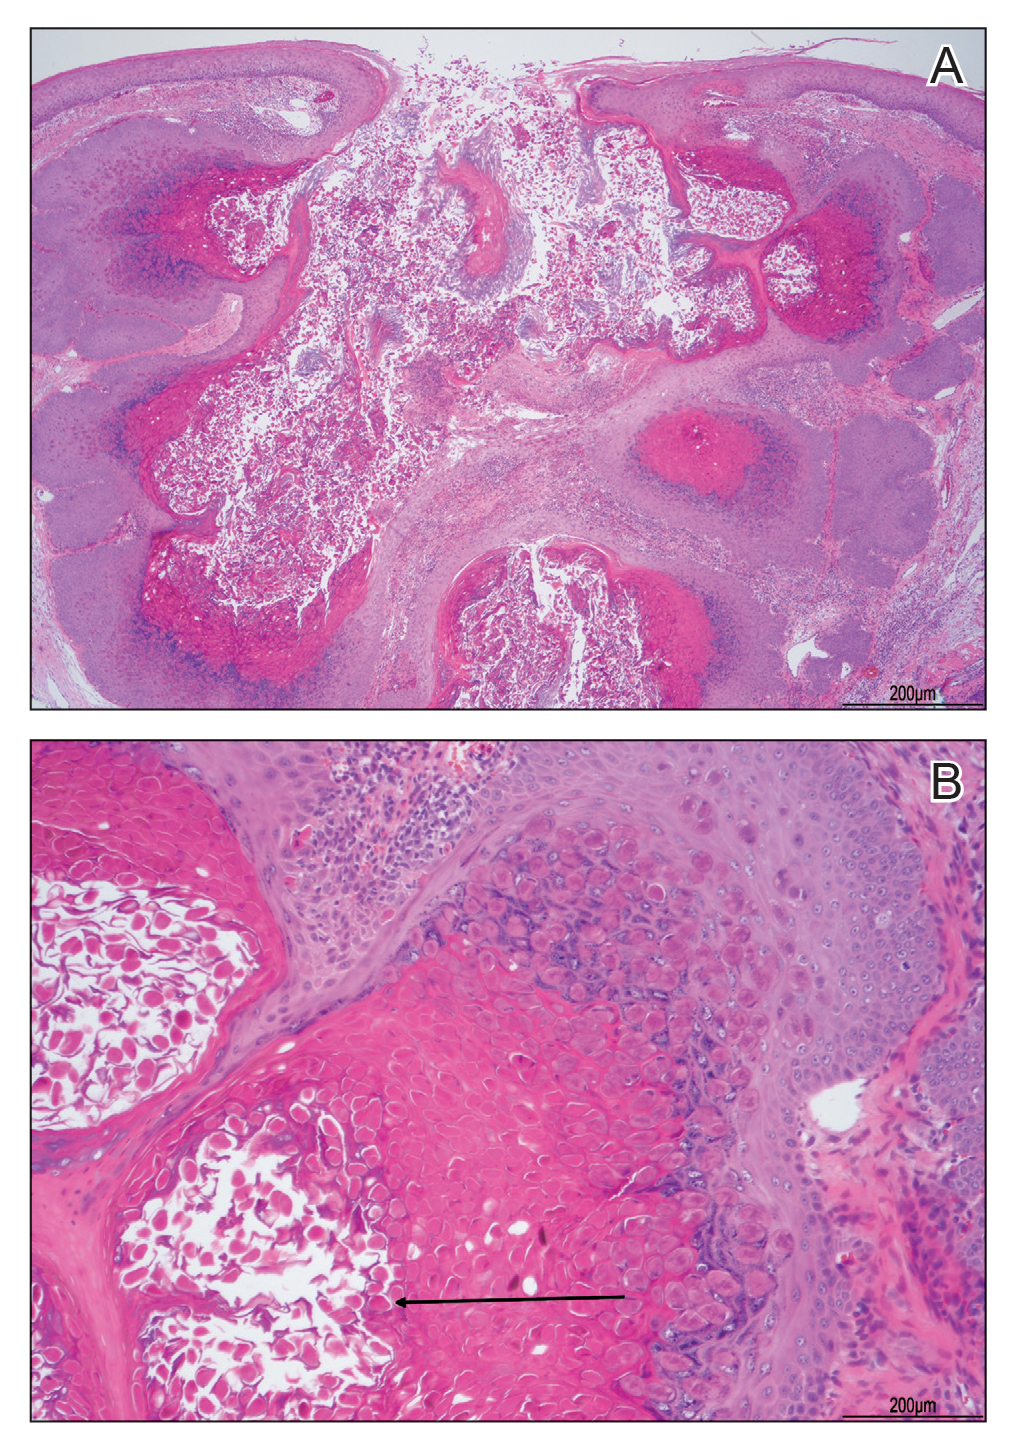 Histopathologic examination of the molluscum contagiosum plaque after shave removal demonstrated pathognomonic intracytoplasmic inclusion bodies (black arrow)(H&E, original magnifications ×4 and ×20). Reference bars indicate 200 µm.